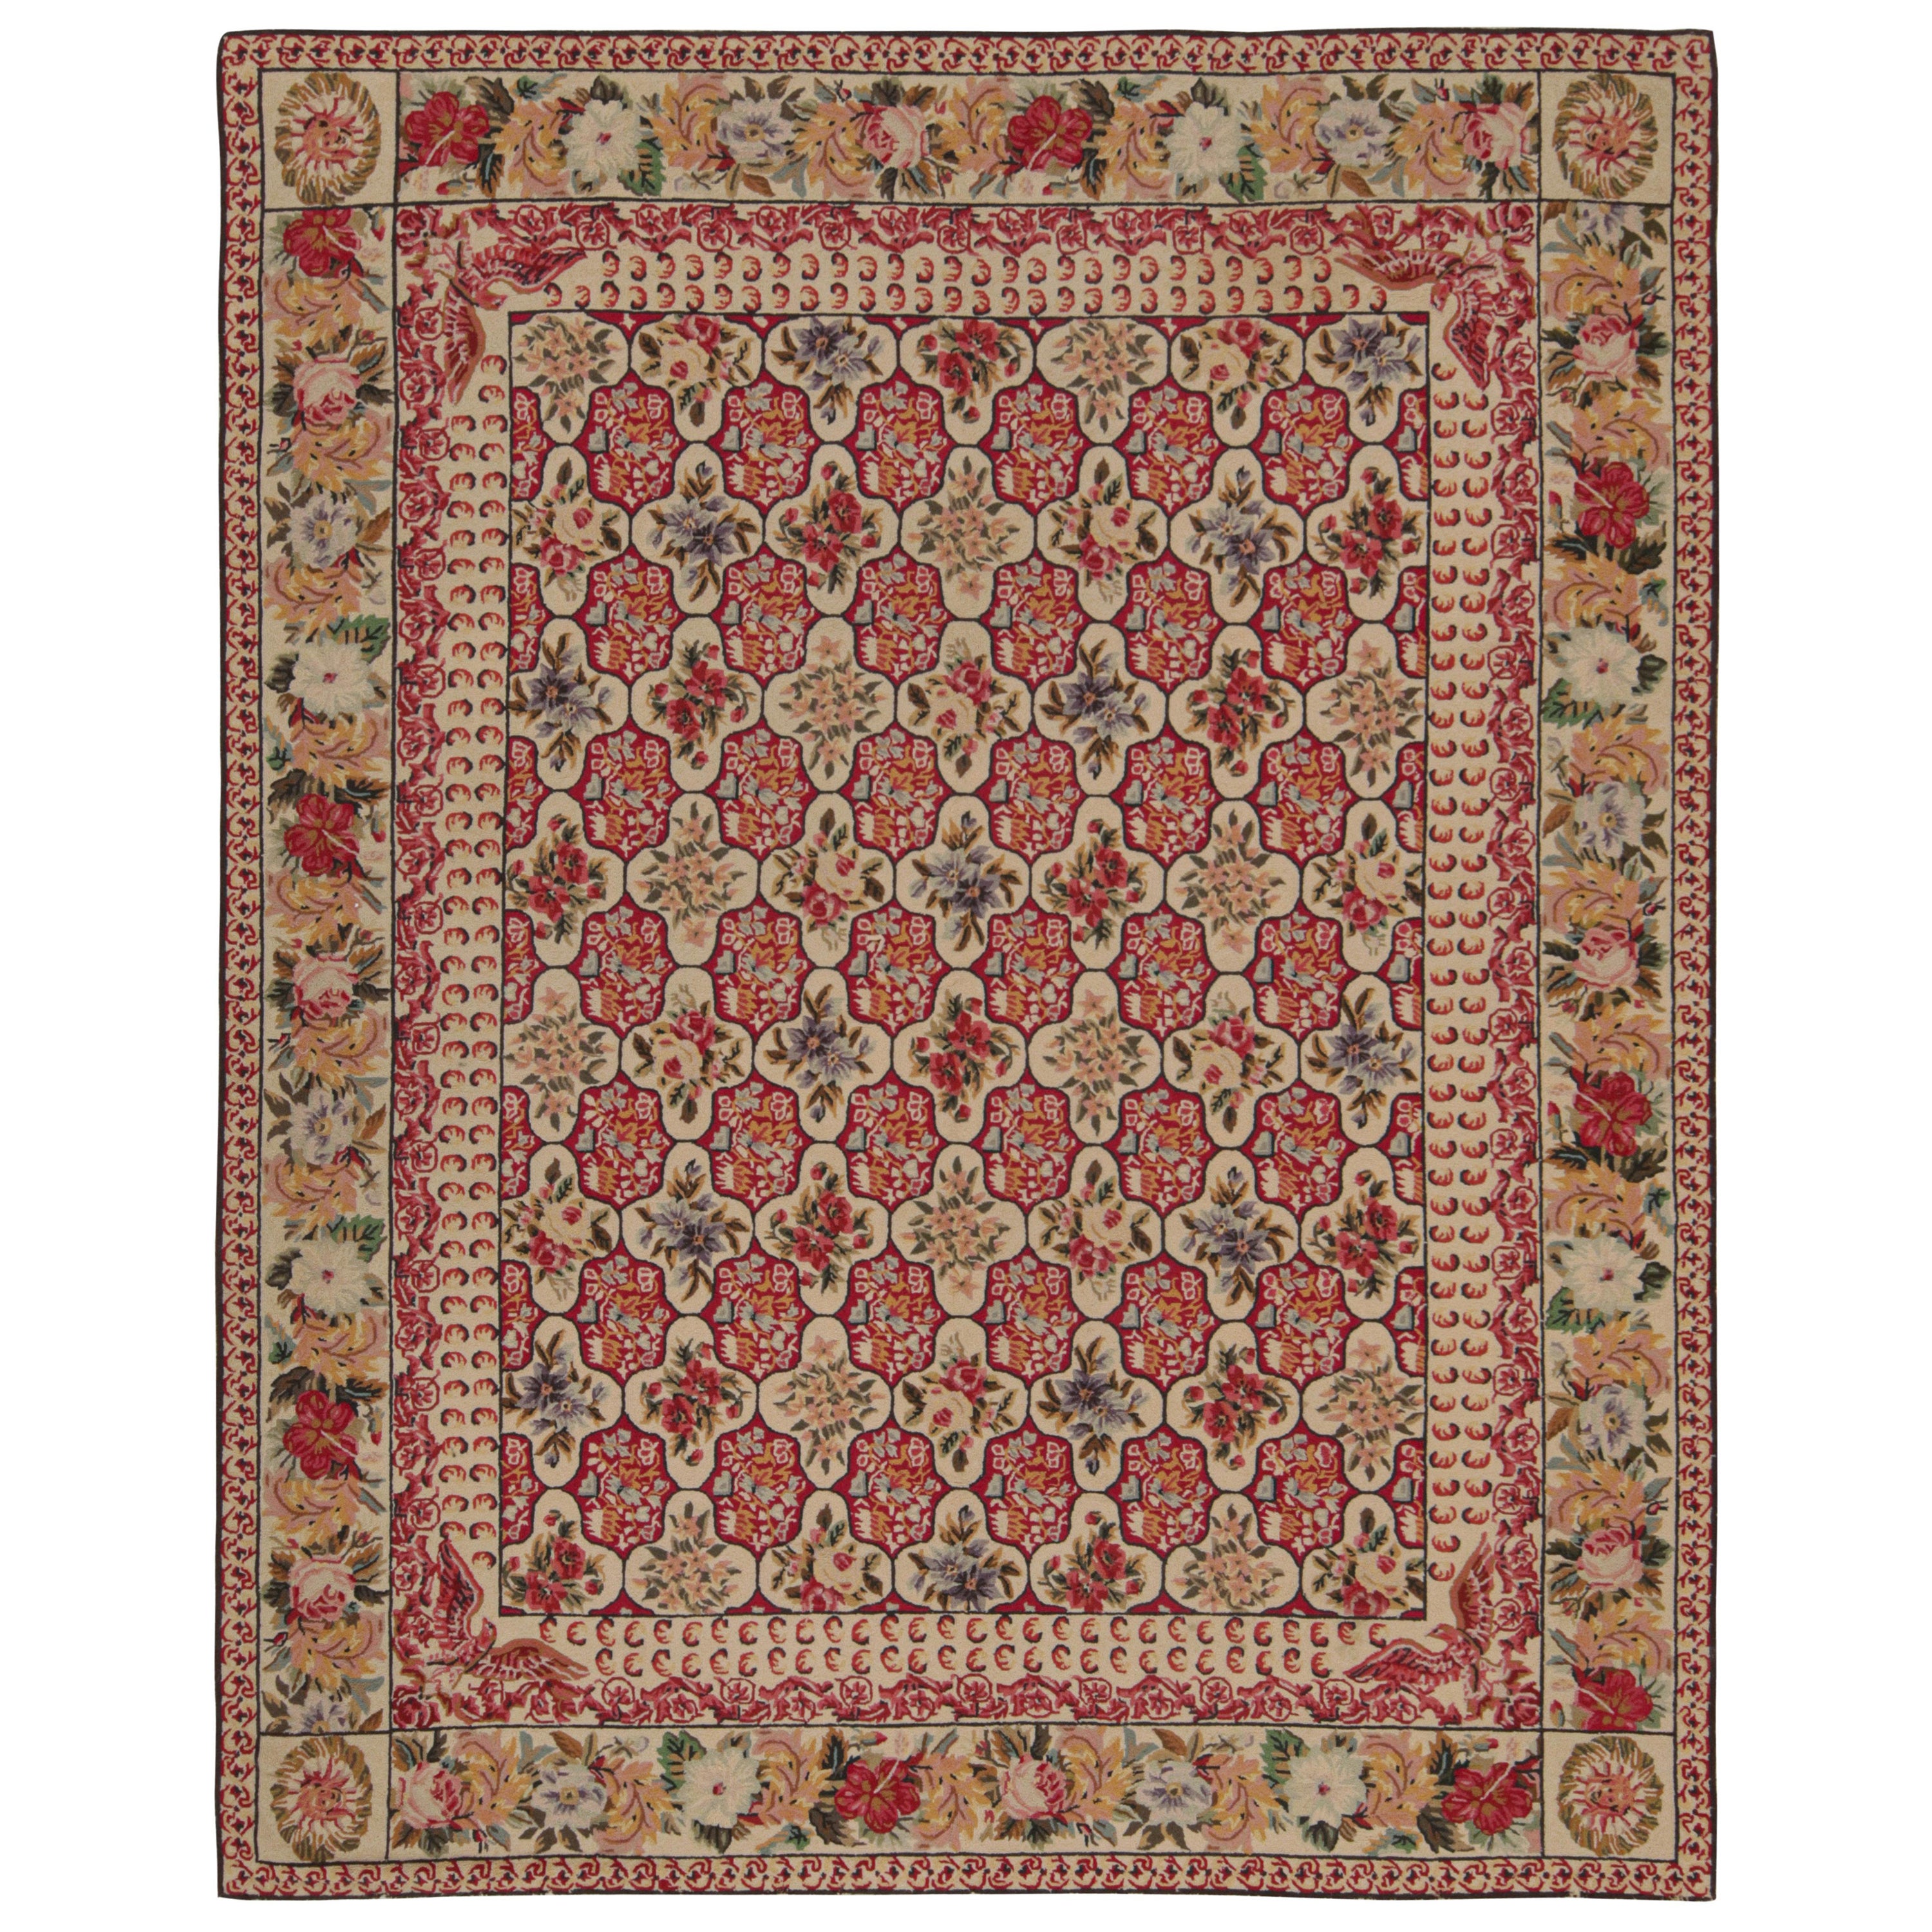 Rare Antique Hooked Rug with Red & Beige Floral Patterns, from Rug & Kilim For Sale